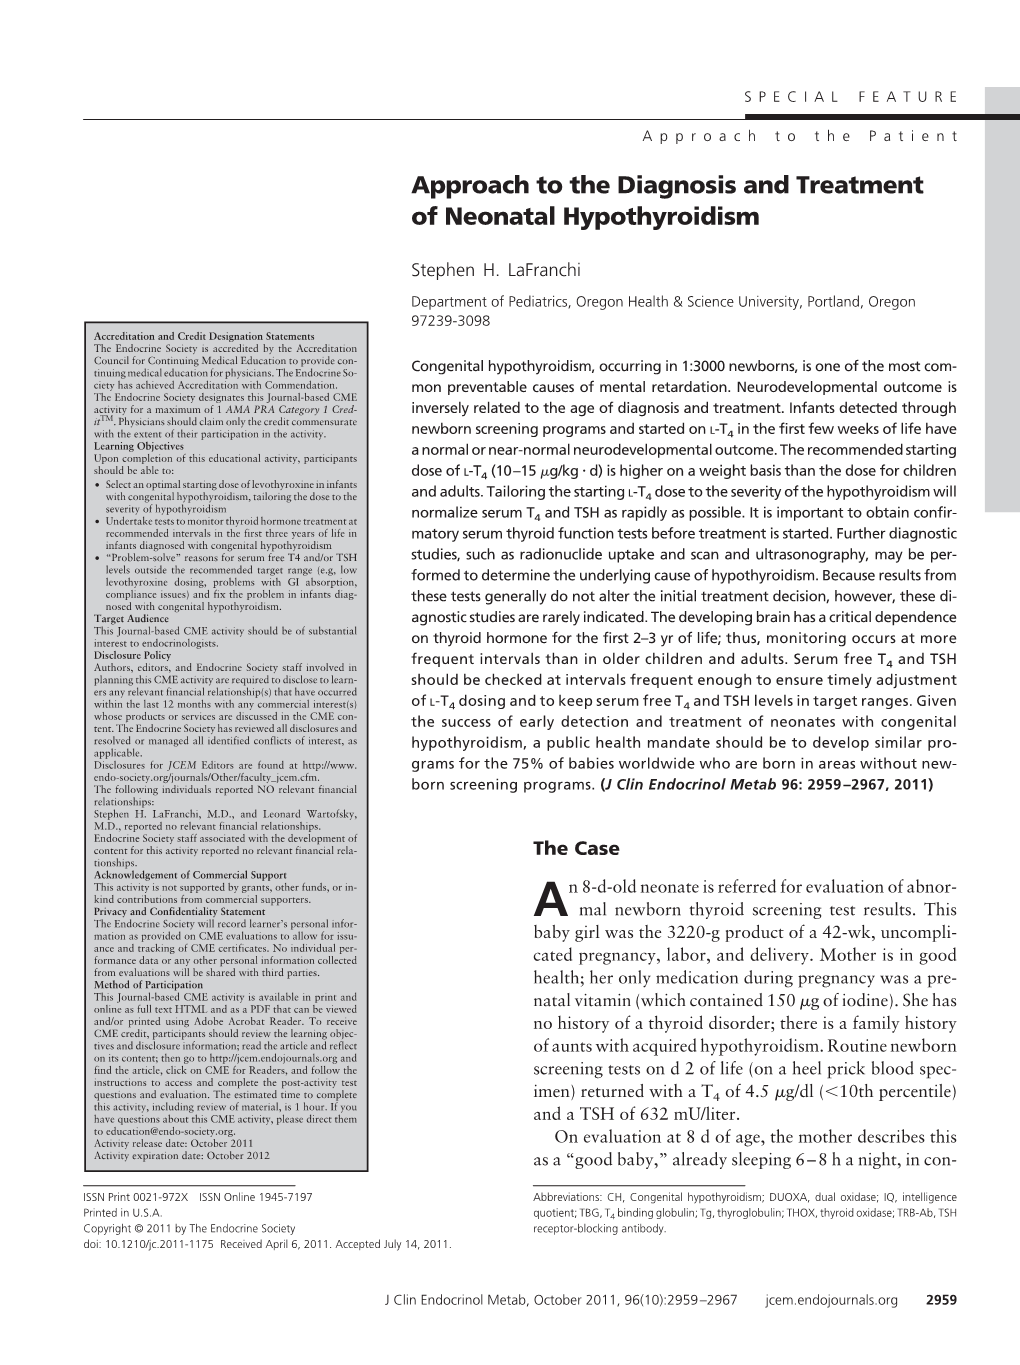 Approach to the Diagnosis and Treatment of Neonatal Hypothyroidism